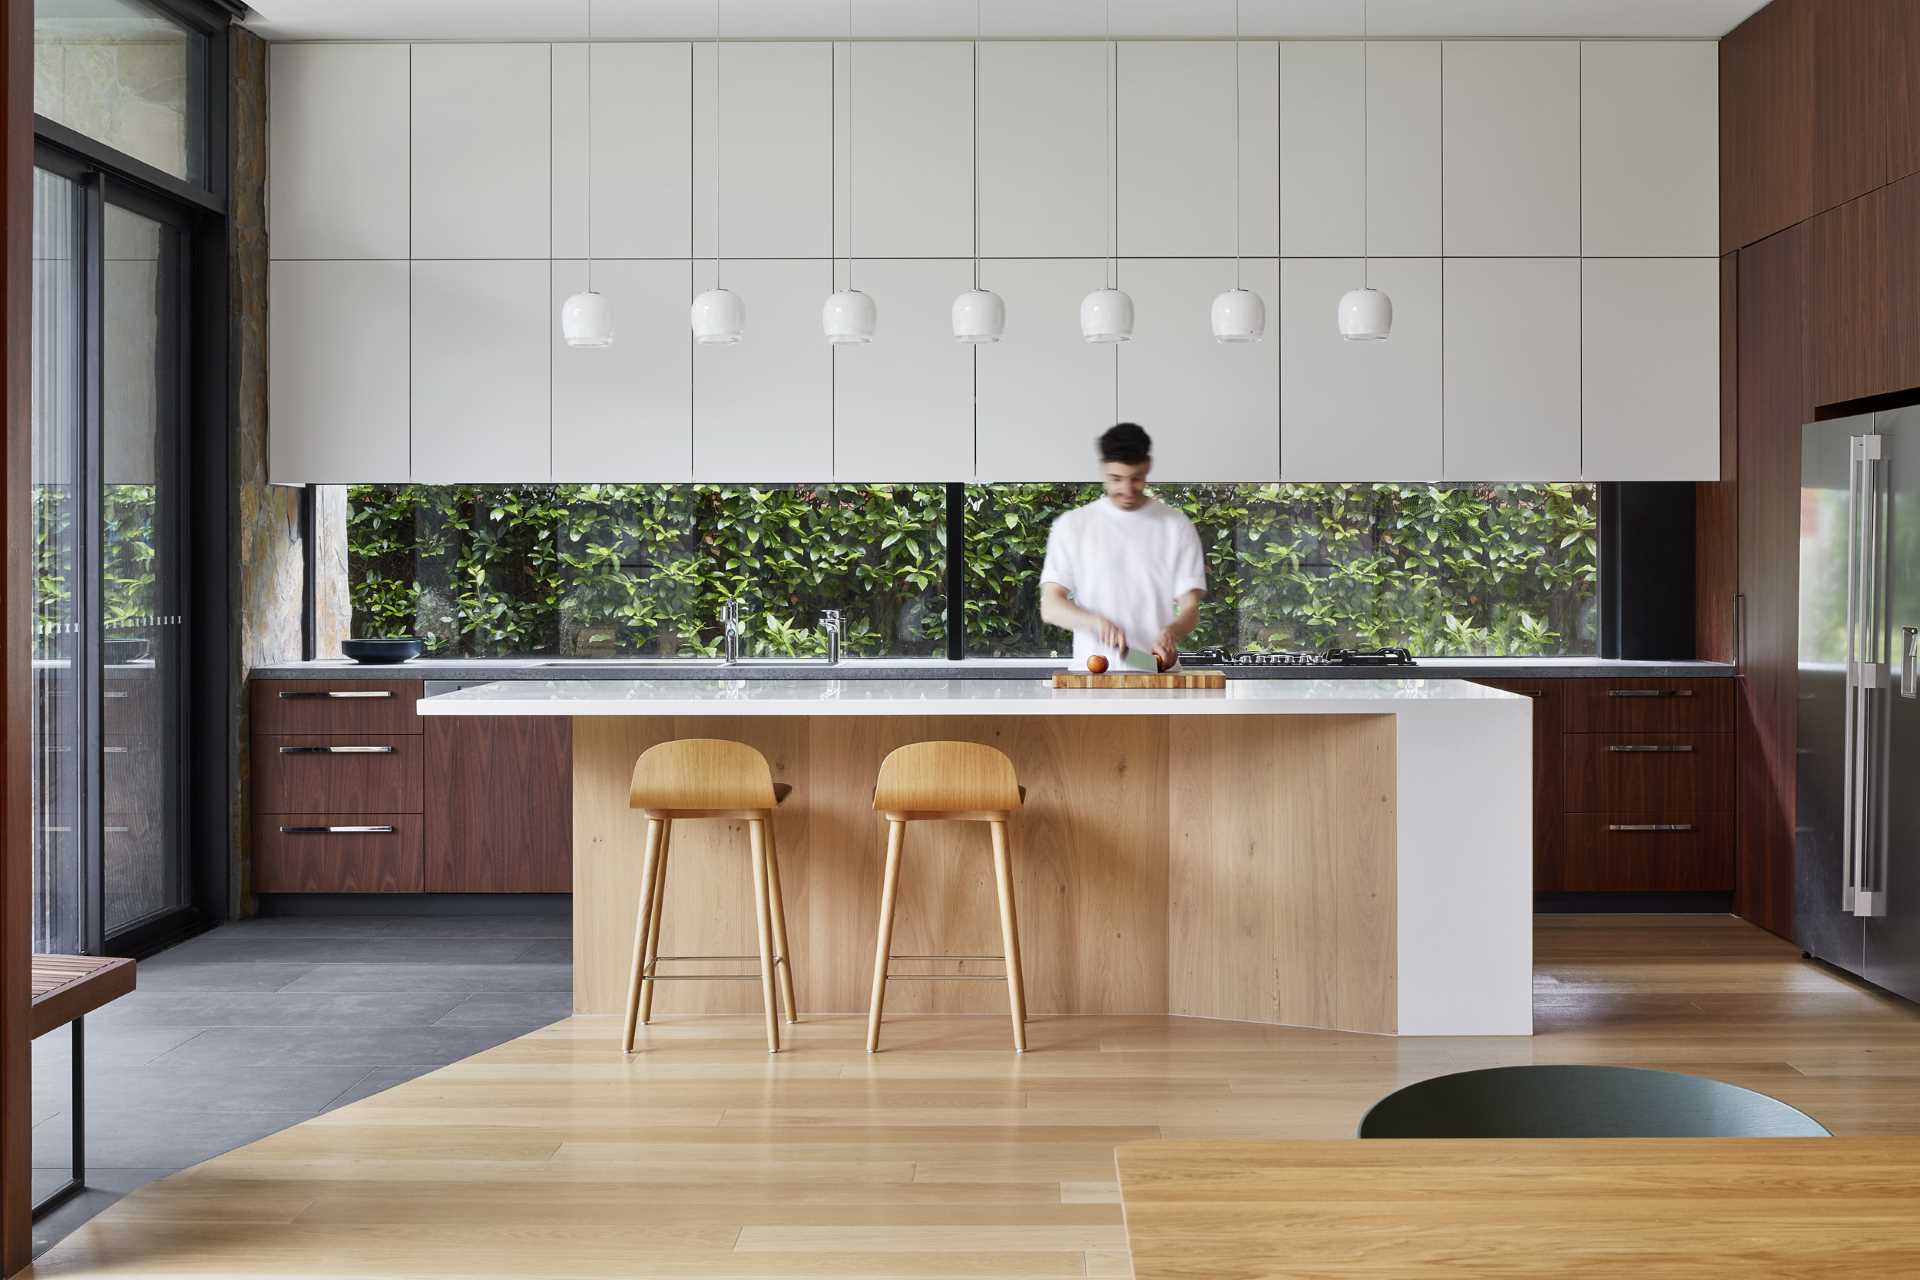 In this modern kitchen, dark wood cabinetry has been paired with minimalist white cabinets, while the island has room for a pair of stools and seven pendant lights to ensure the island is well-lit. The kitchen also includes a gl، backsplash, allowing the plants outside to be seen.